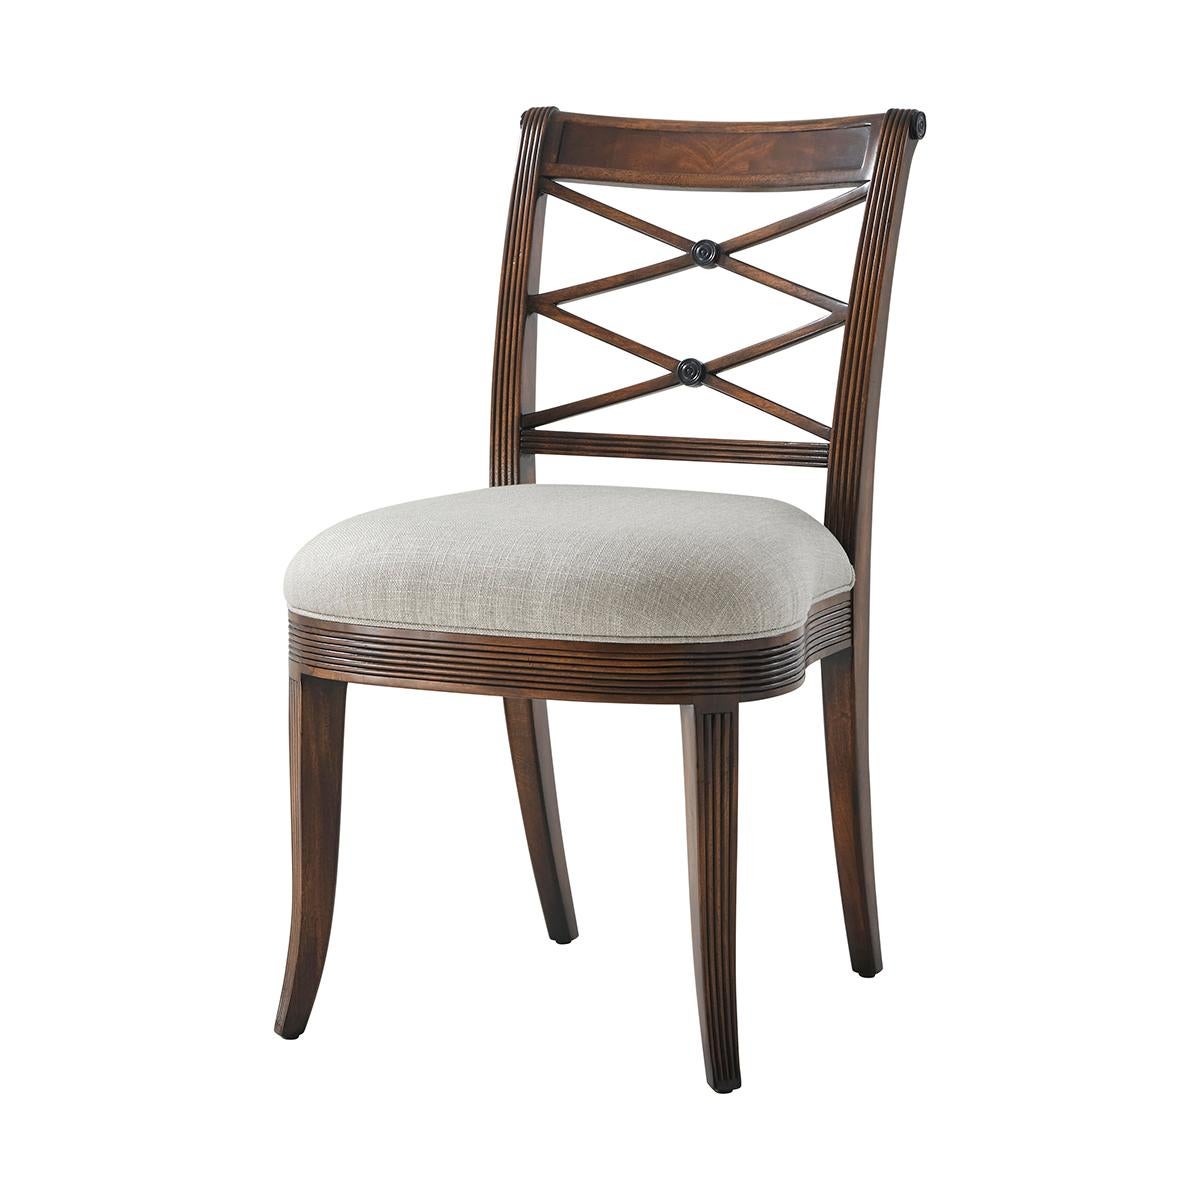 Hand carved side chair with reeded decoration, the over scroll and double ‘X’ pierced back above an upholstered seat, on sabre legs.
Dimensions: 20